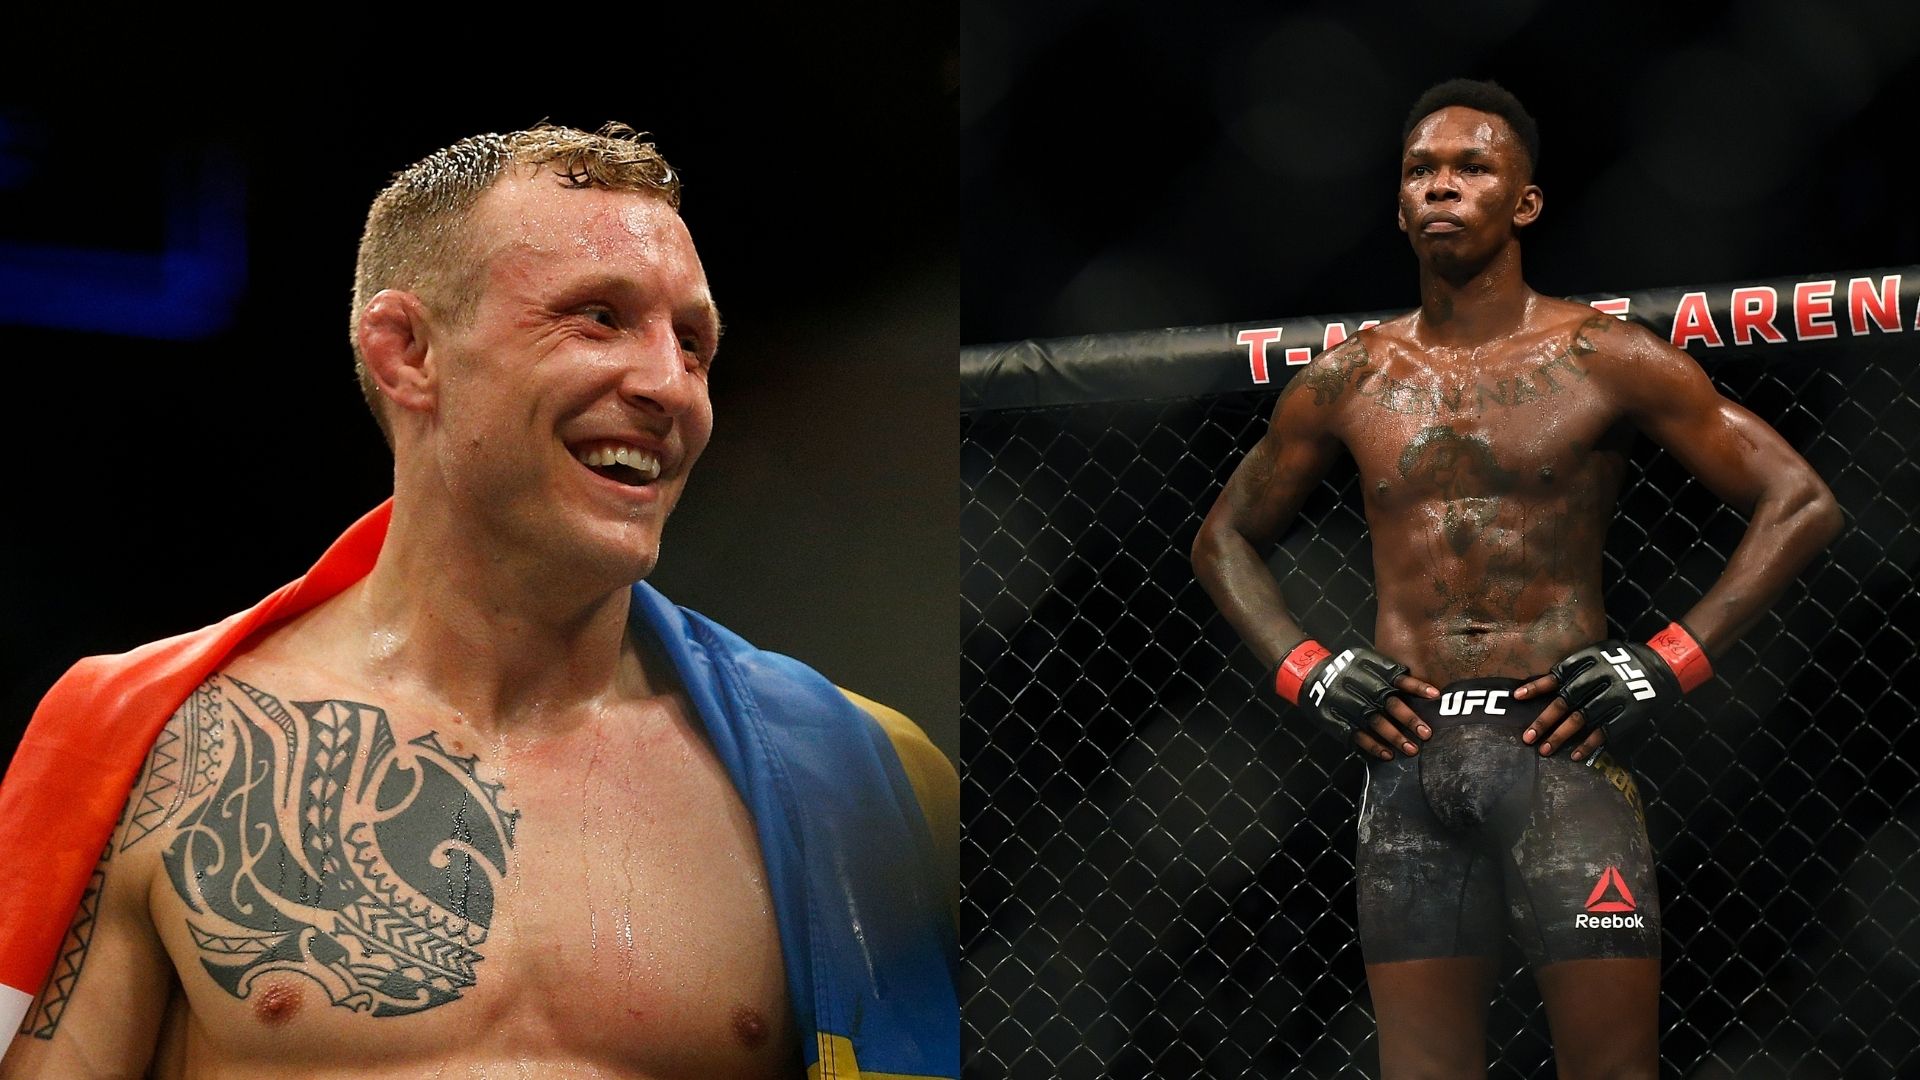 Jack Hermansson shares the one advantage he has over Israel Adesanya